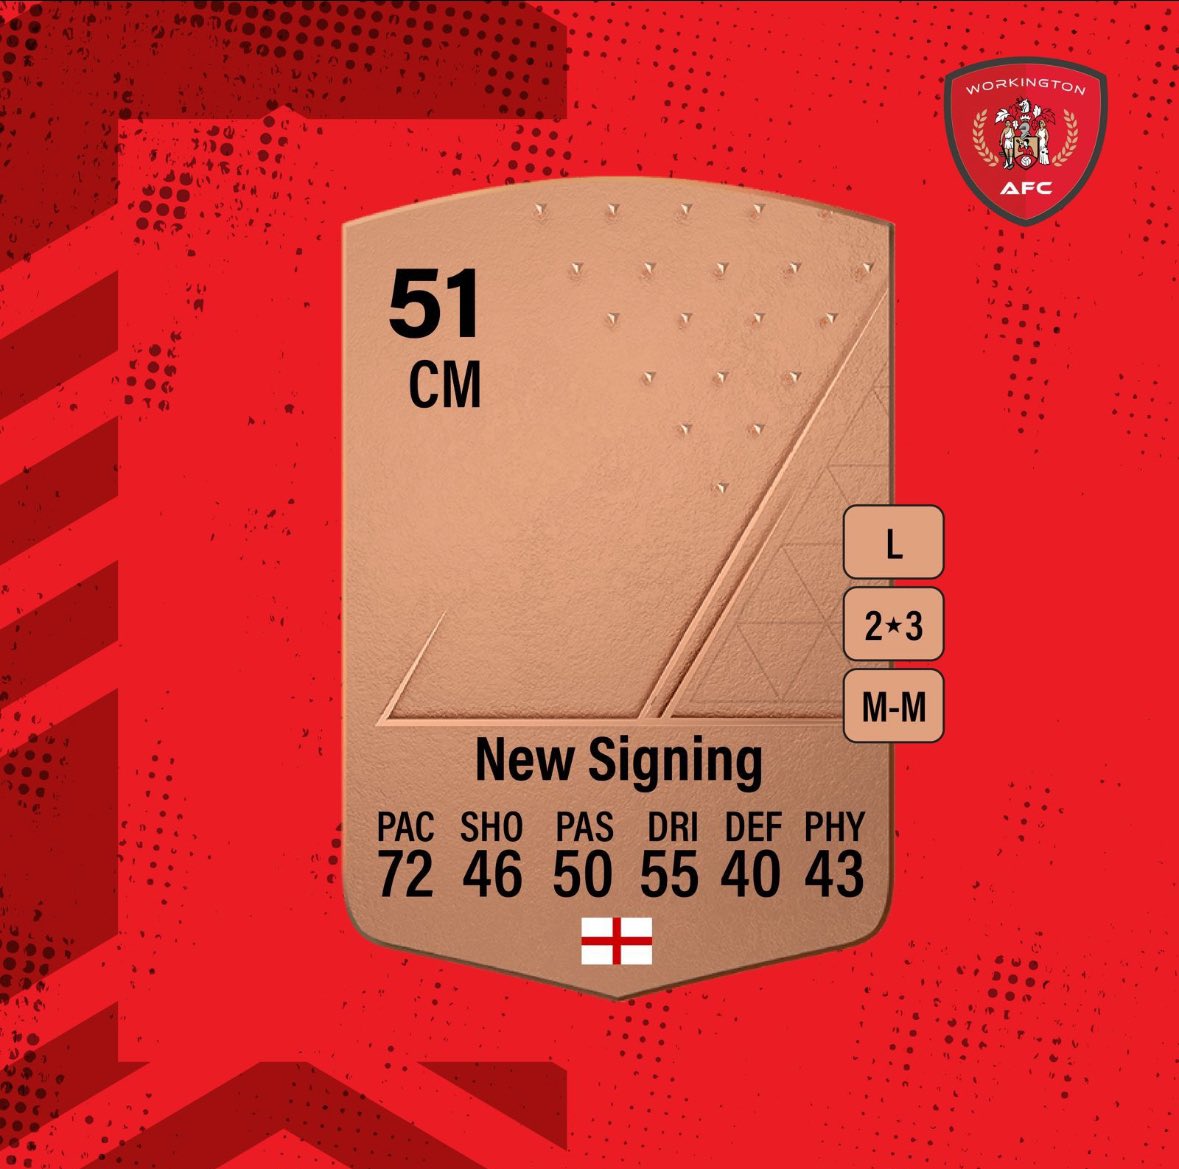 𝙂𝙪𝙚𝙨𝙨 𝙬𝙝𝙤’𝙨 𝙗𝙖𝙘𝙠…🤔 A familiar face with some impressive stats is returning to Borough Park! Check out his FIFA card highlights: 72 PAC, 55 DRI. Can you guess who it is?  Stay tuned for the big reveal at 18:00 #RichHistoryBrightFuture #RedsRiseAgain